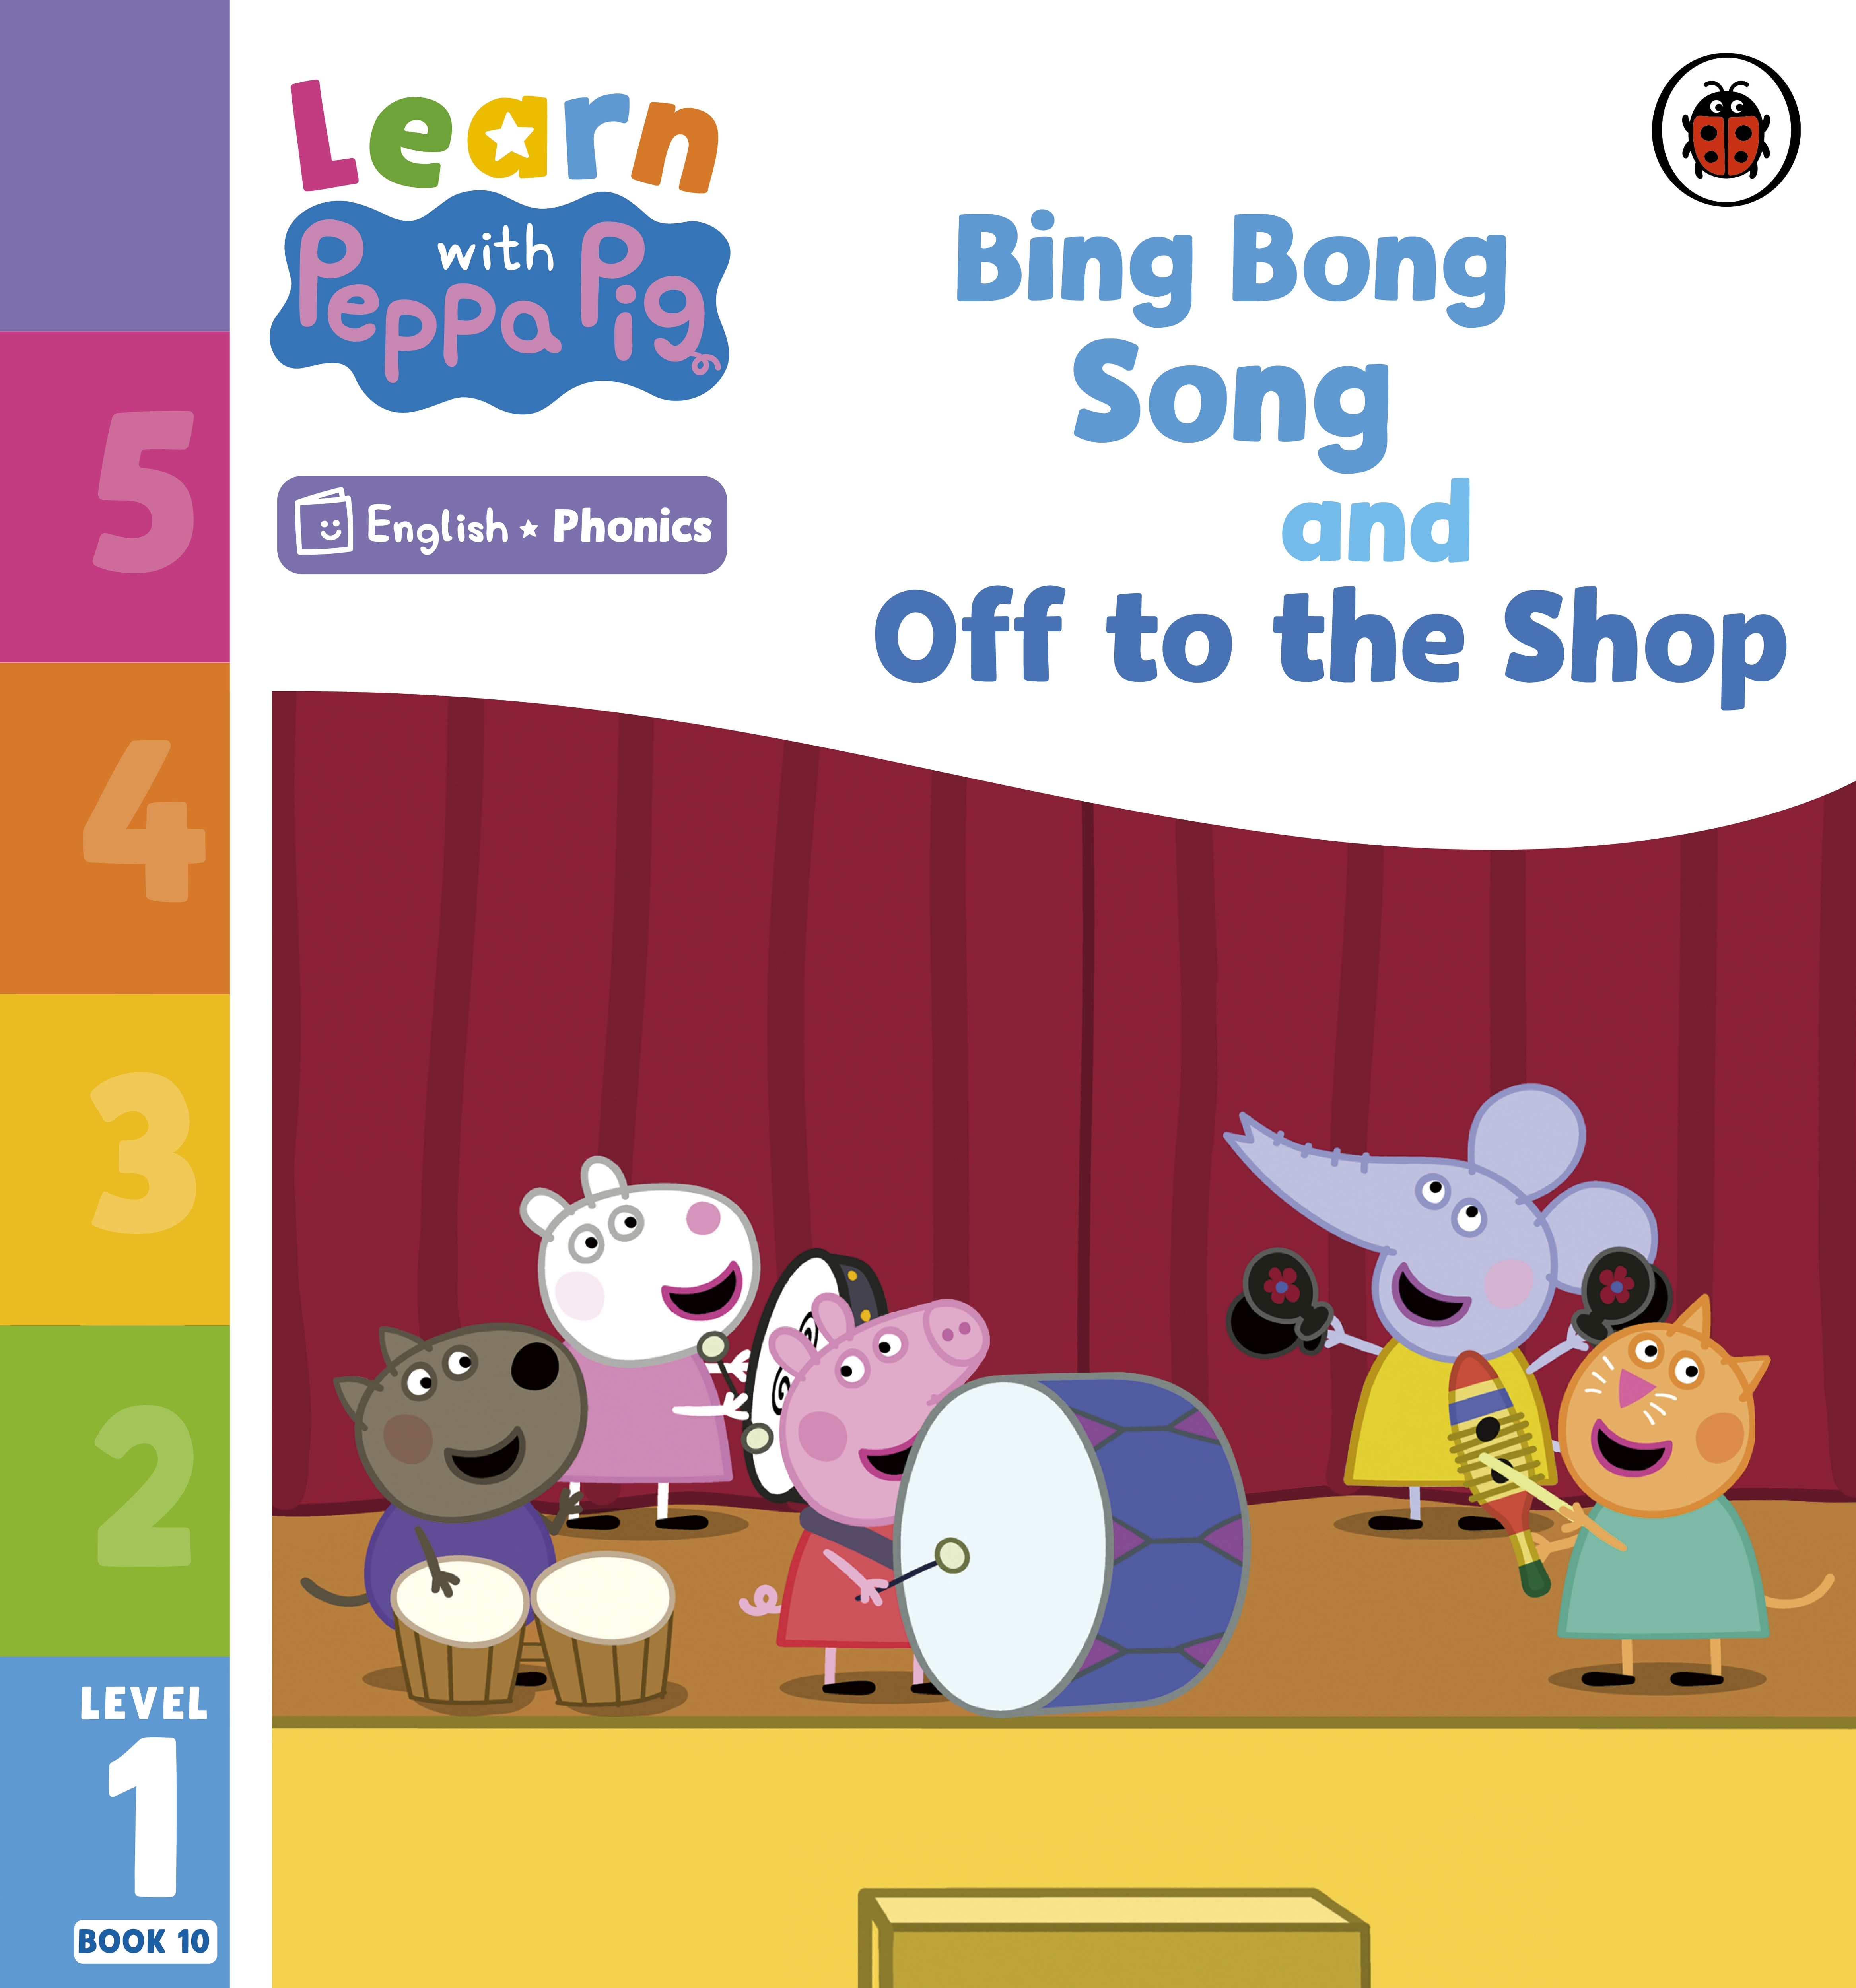 Learn with Peppa Phonics Level 1 Book 10 — Bing Bong Song and Off to the Shop (Phonics Reader)